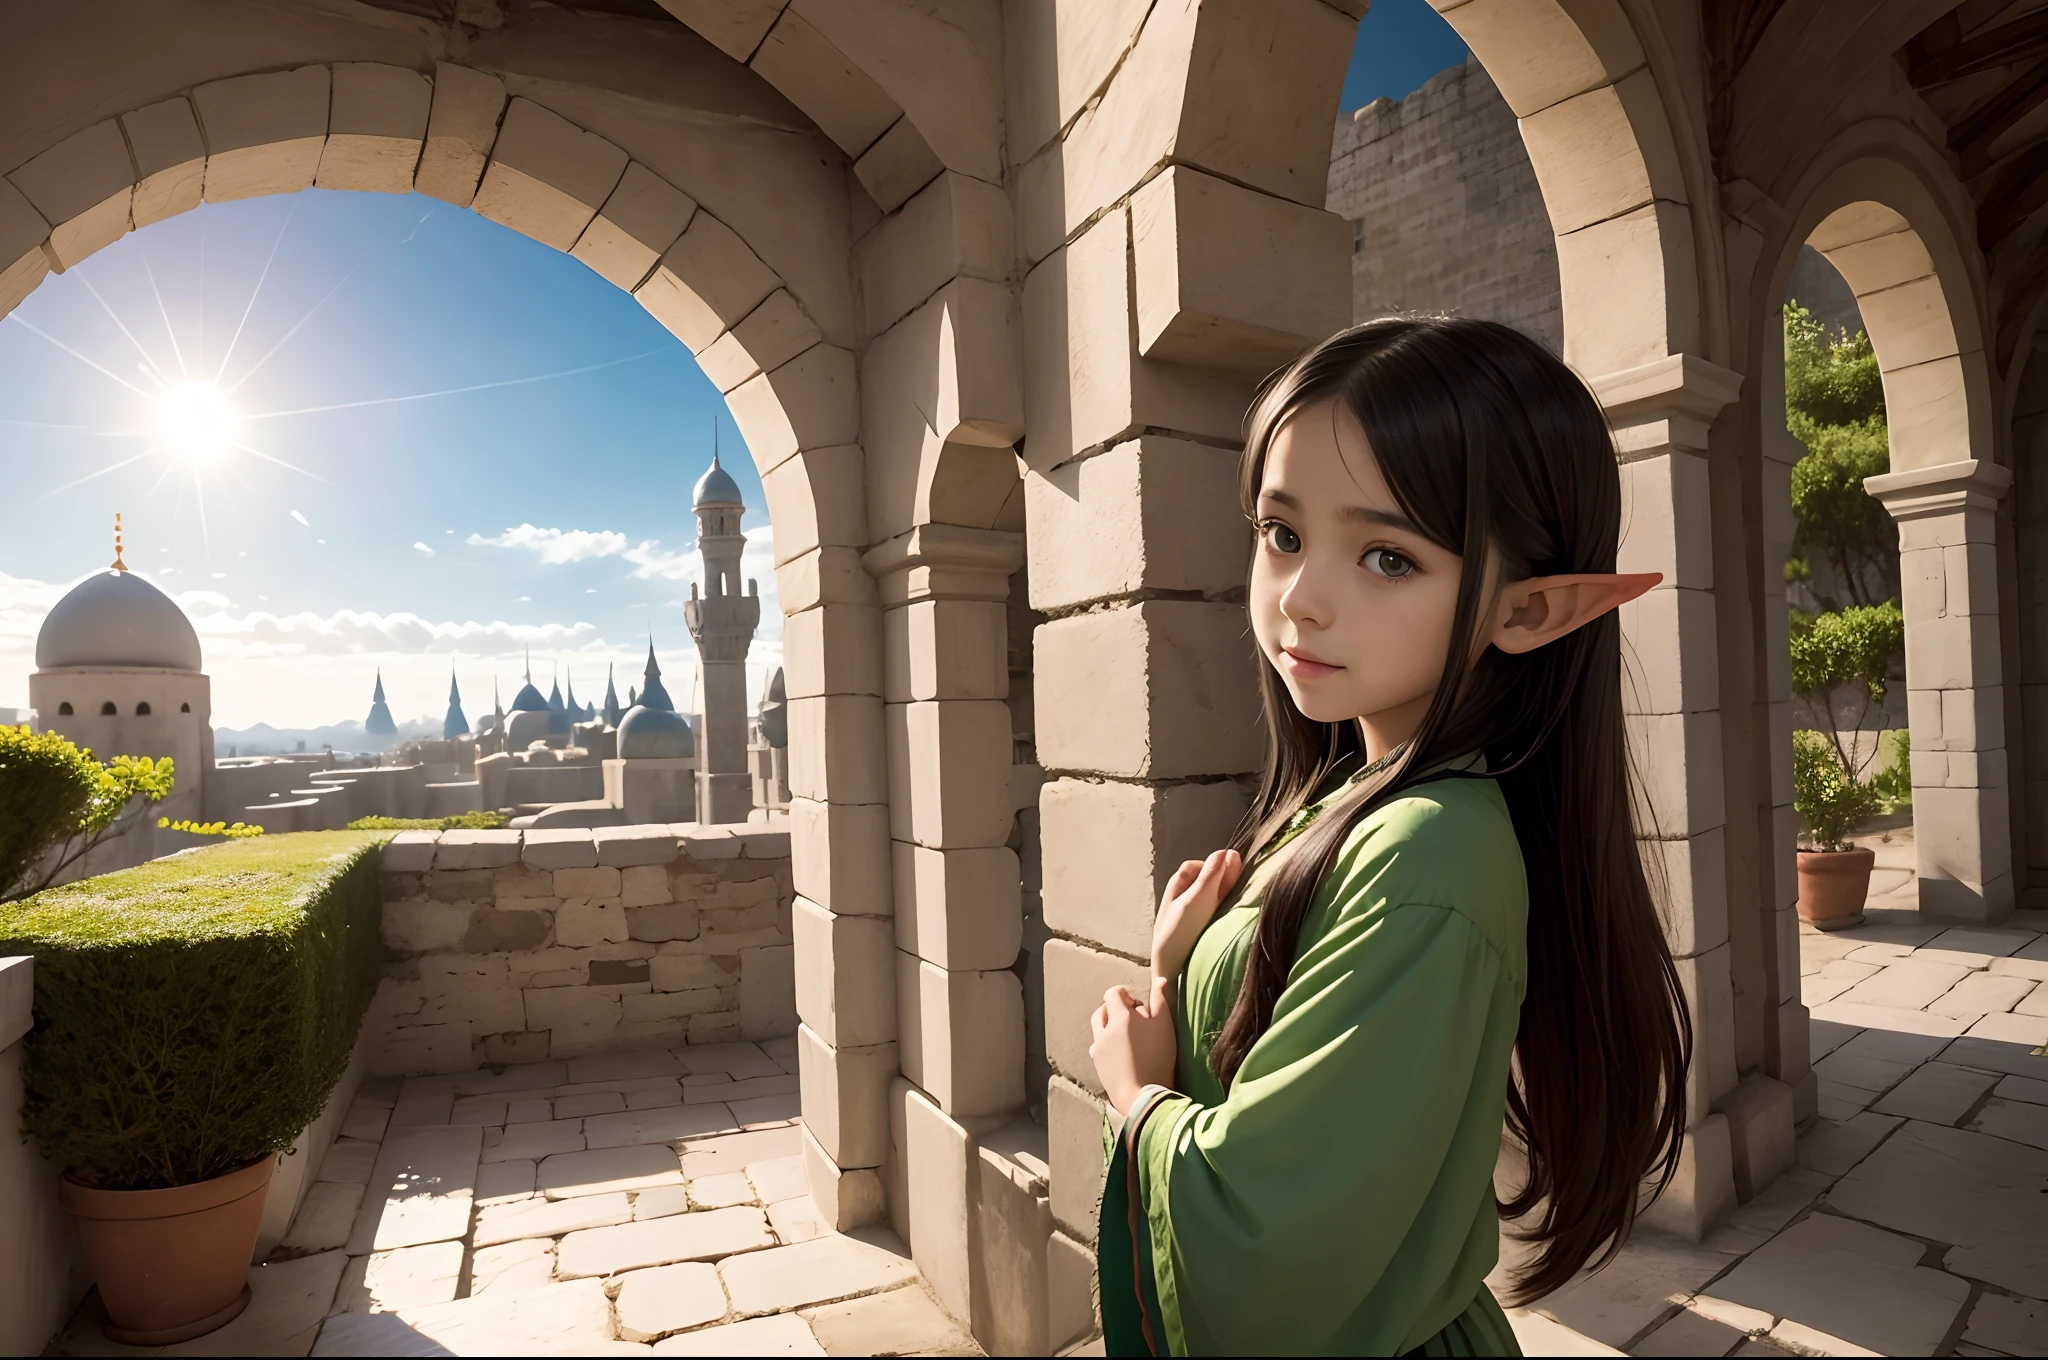 an adorable little half-elf girl is playing in a walled courtyard in a fantasy city with her cousins and friends. She has black hair, pale brown skin, and green eyes, and has a generally middle-eastern appearance. She is about 10 years old. The sun is shining brightly. Adult half-elves are looking on from the sides. The scene is full of fun and energy.